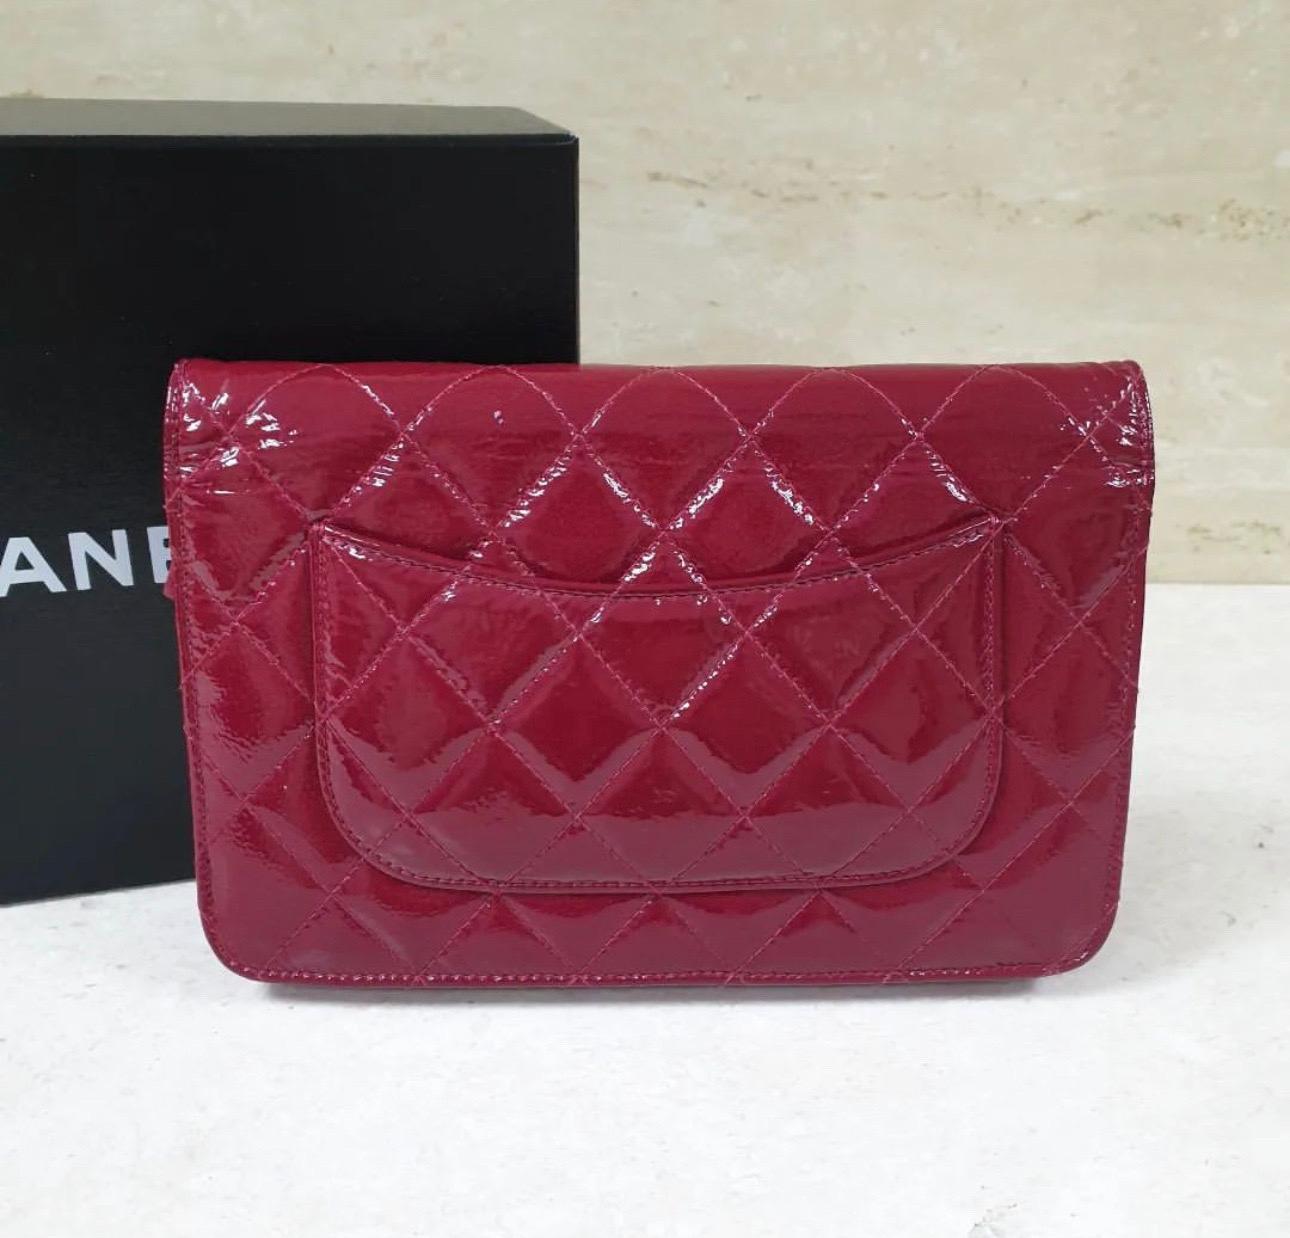 Chanel 2.55 Reissue WOC Red Rouge Patent Leather Bag 1